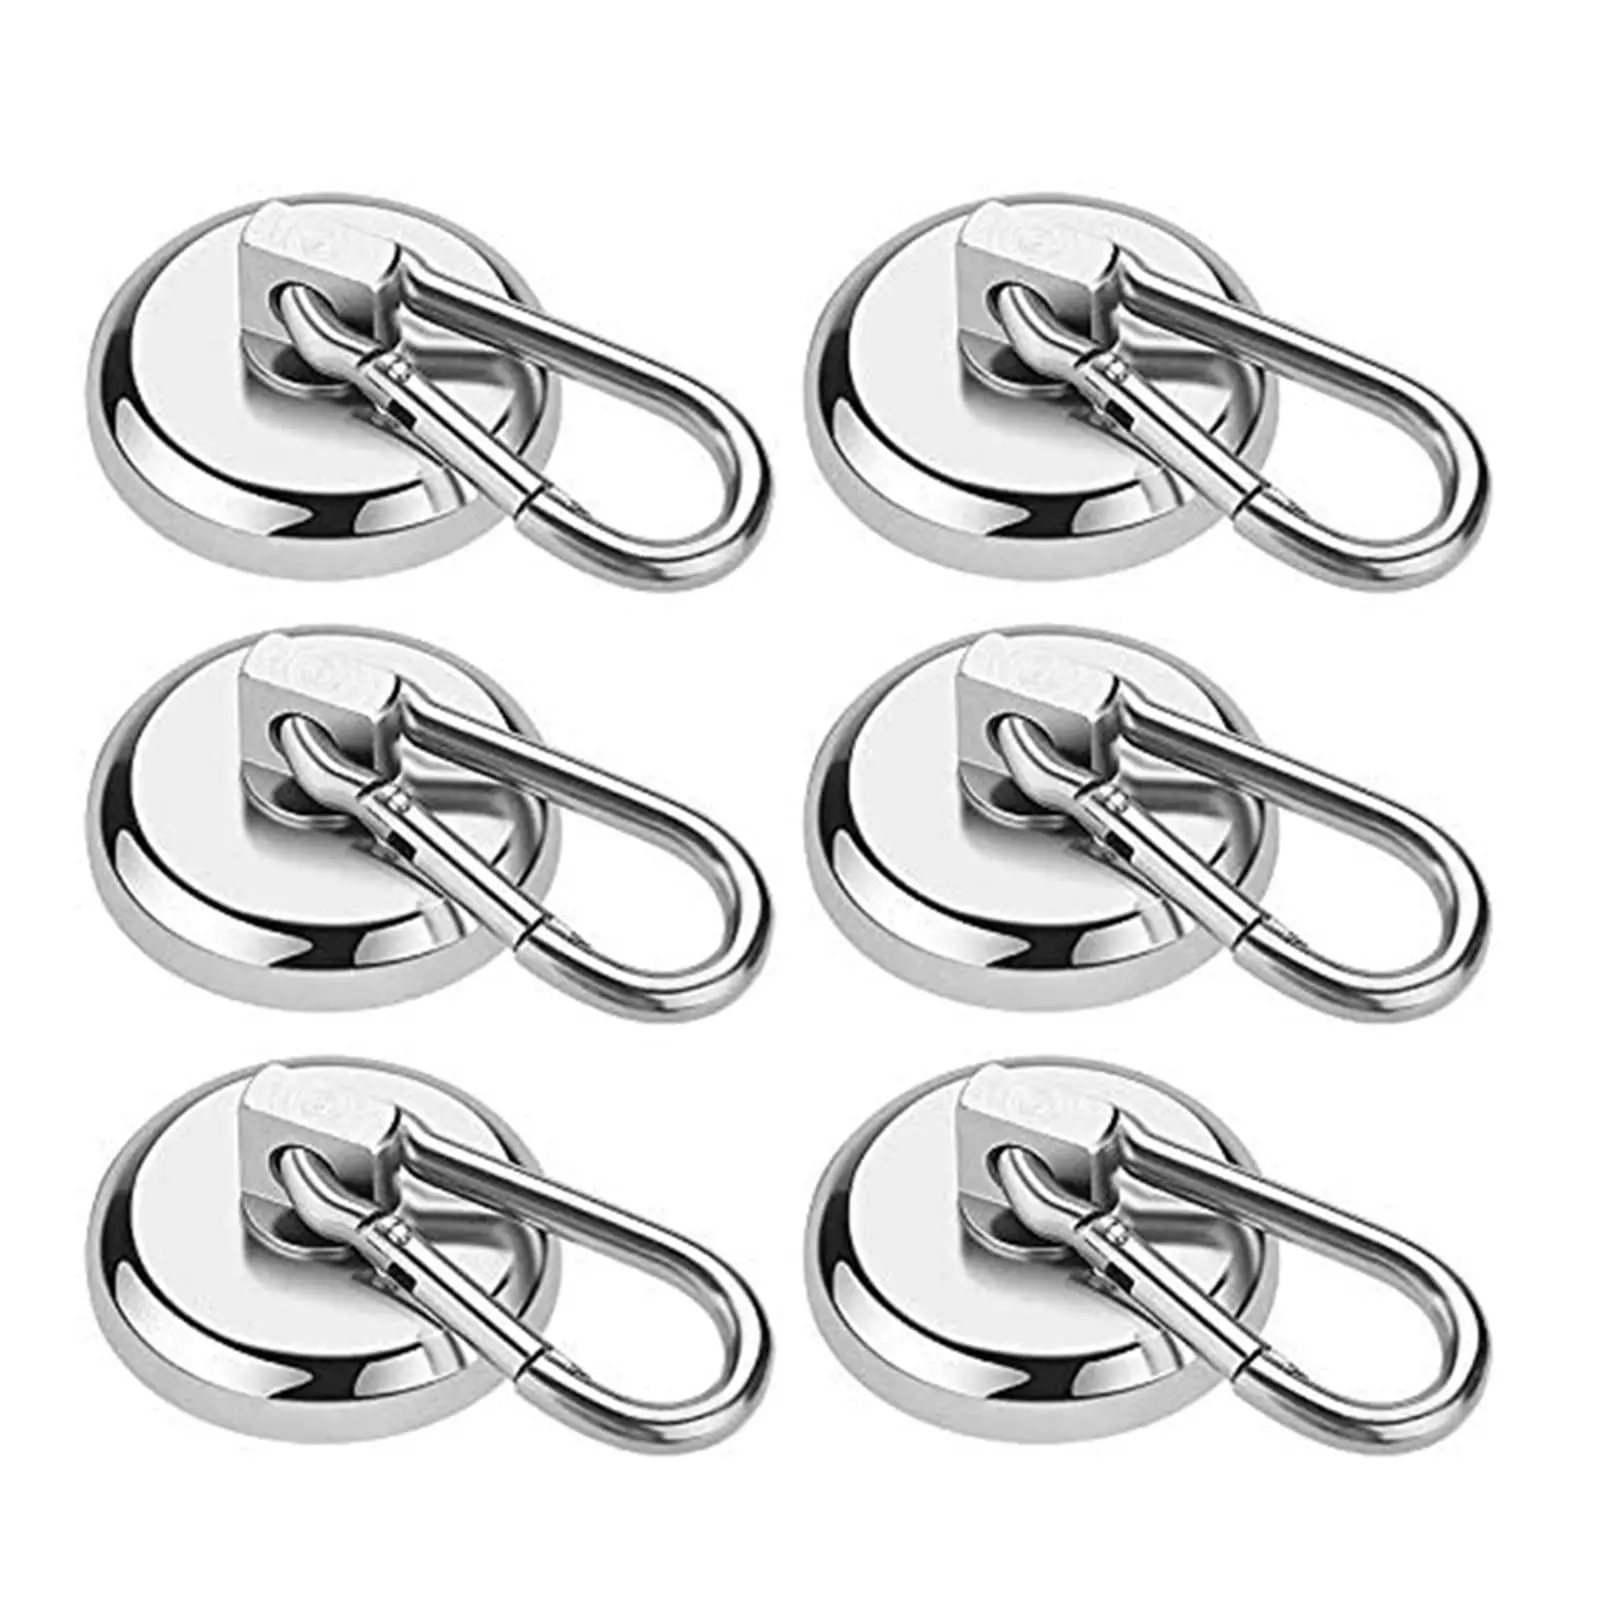 

1Pc Carabiner Magnetic Hooks Super Strong Neodymium Magnet with Swivel Carabiner Heavy Duty Neodymium Magnetic Hooks for Hanging